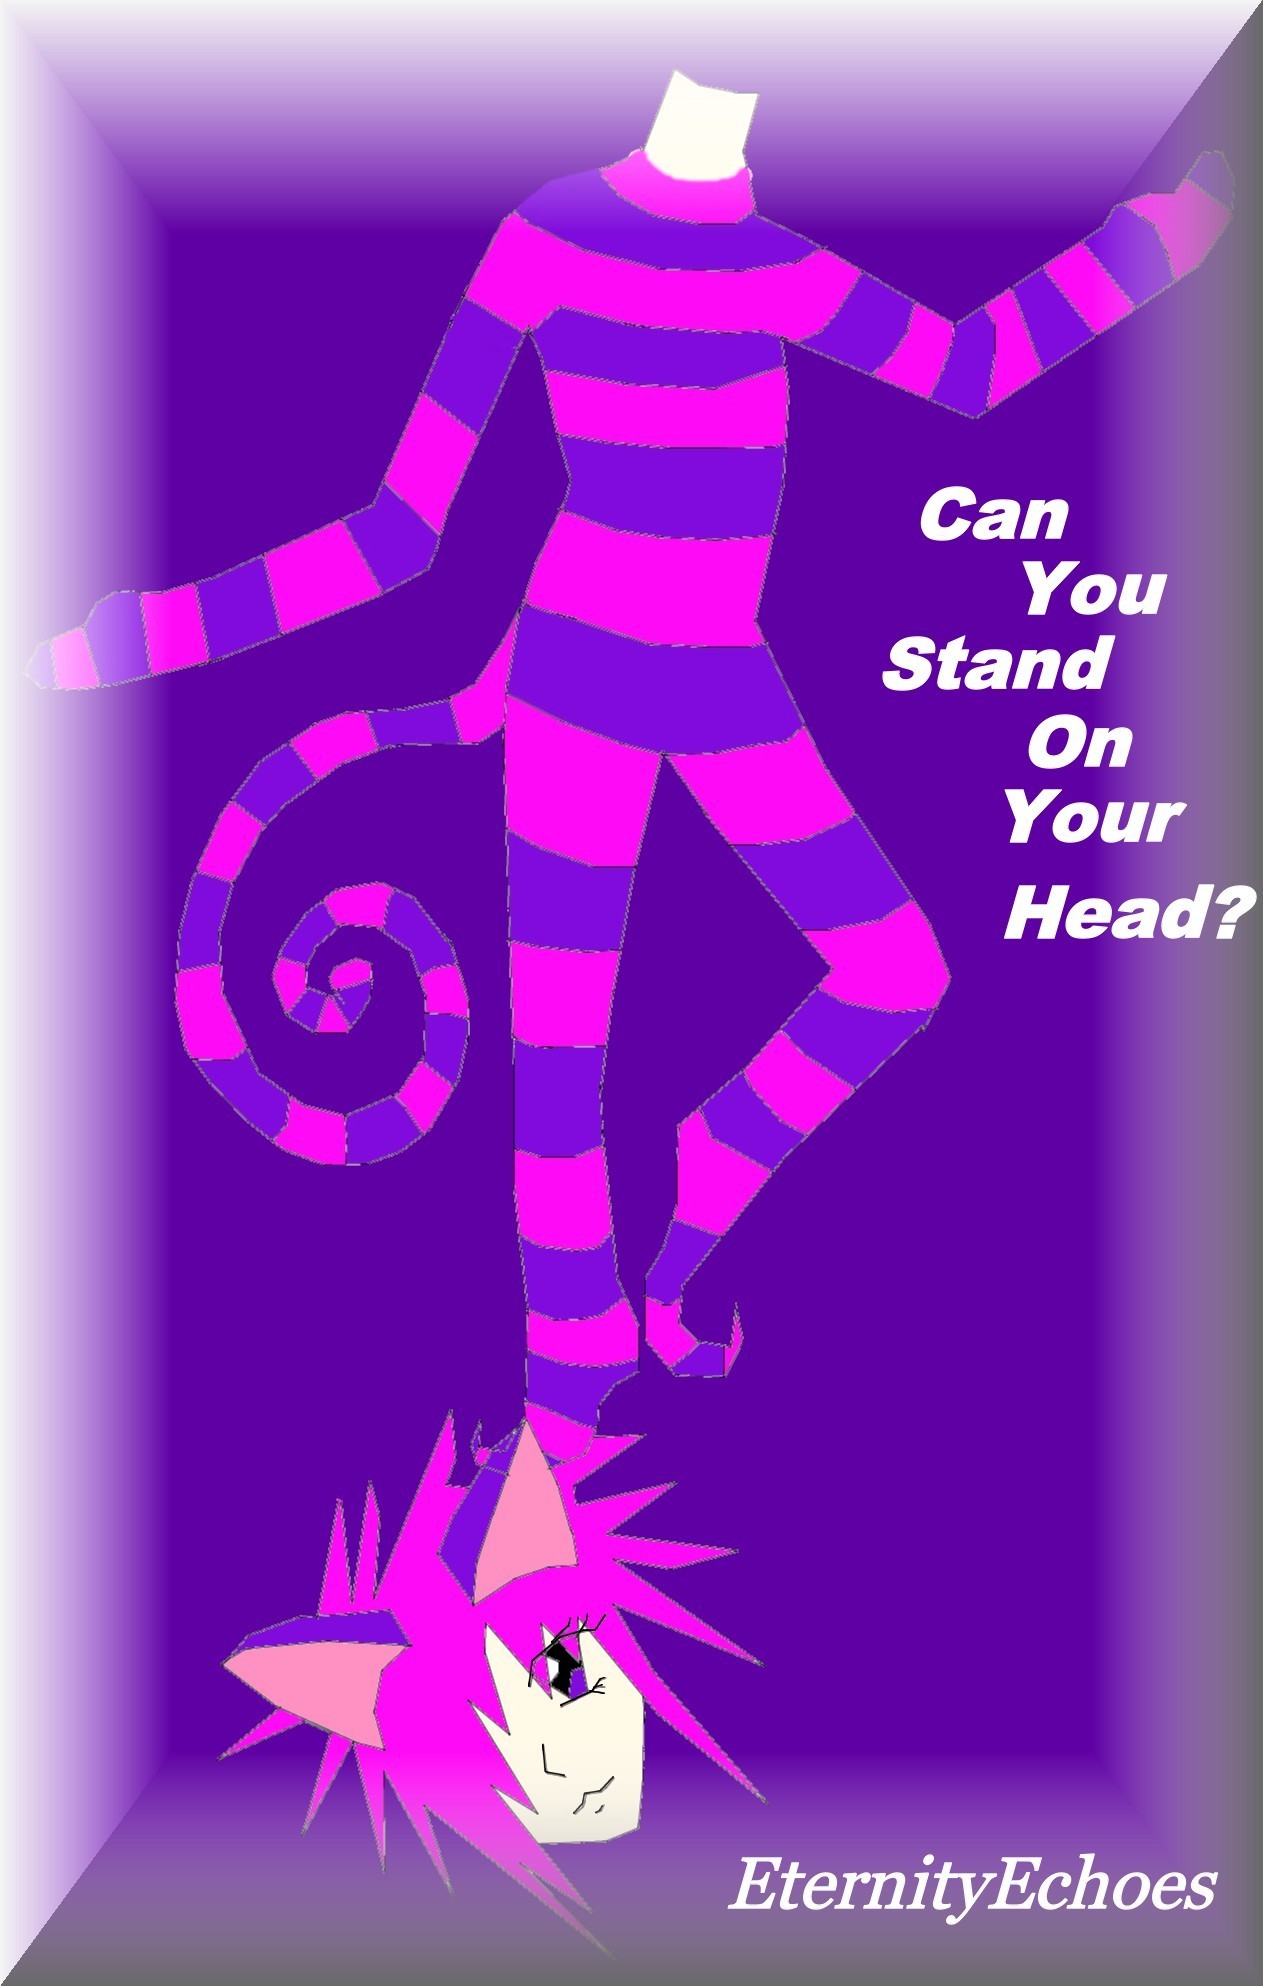 Can You Stand On Your Head?